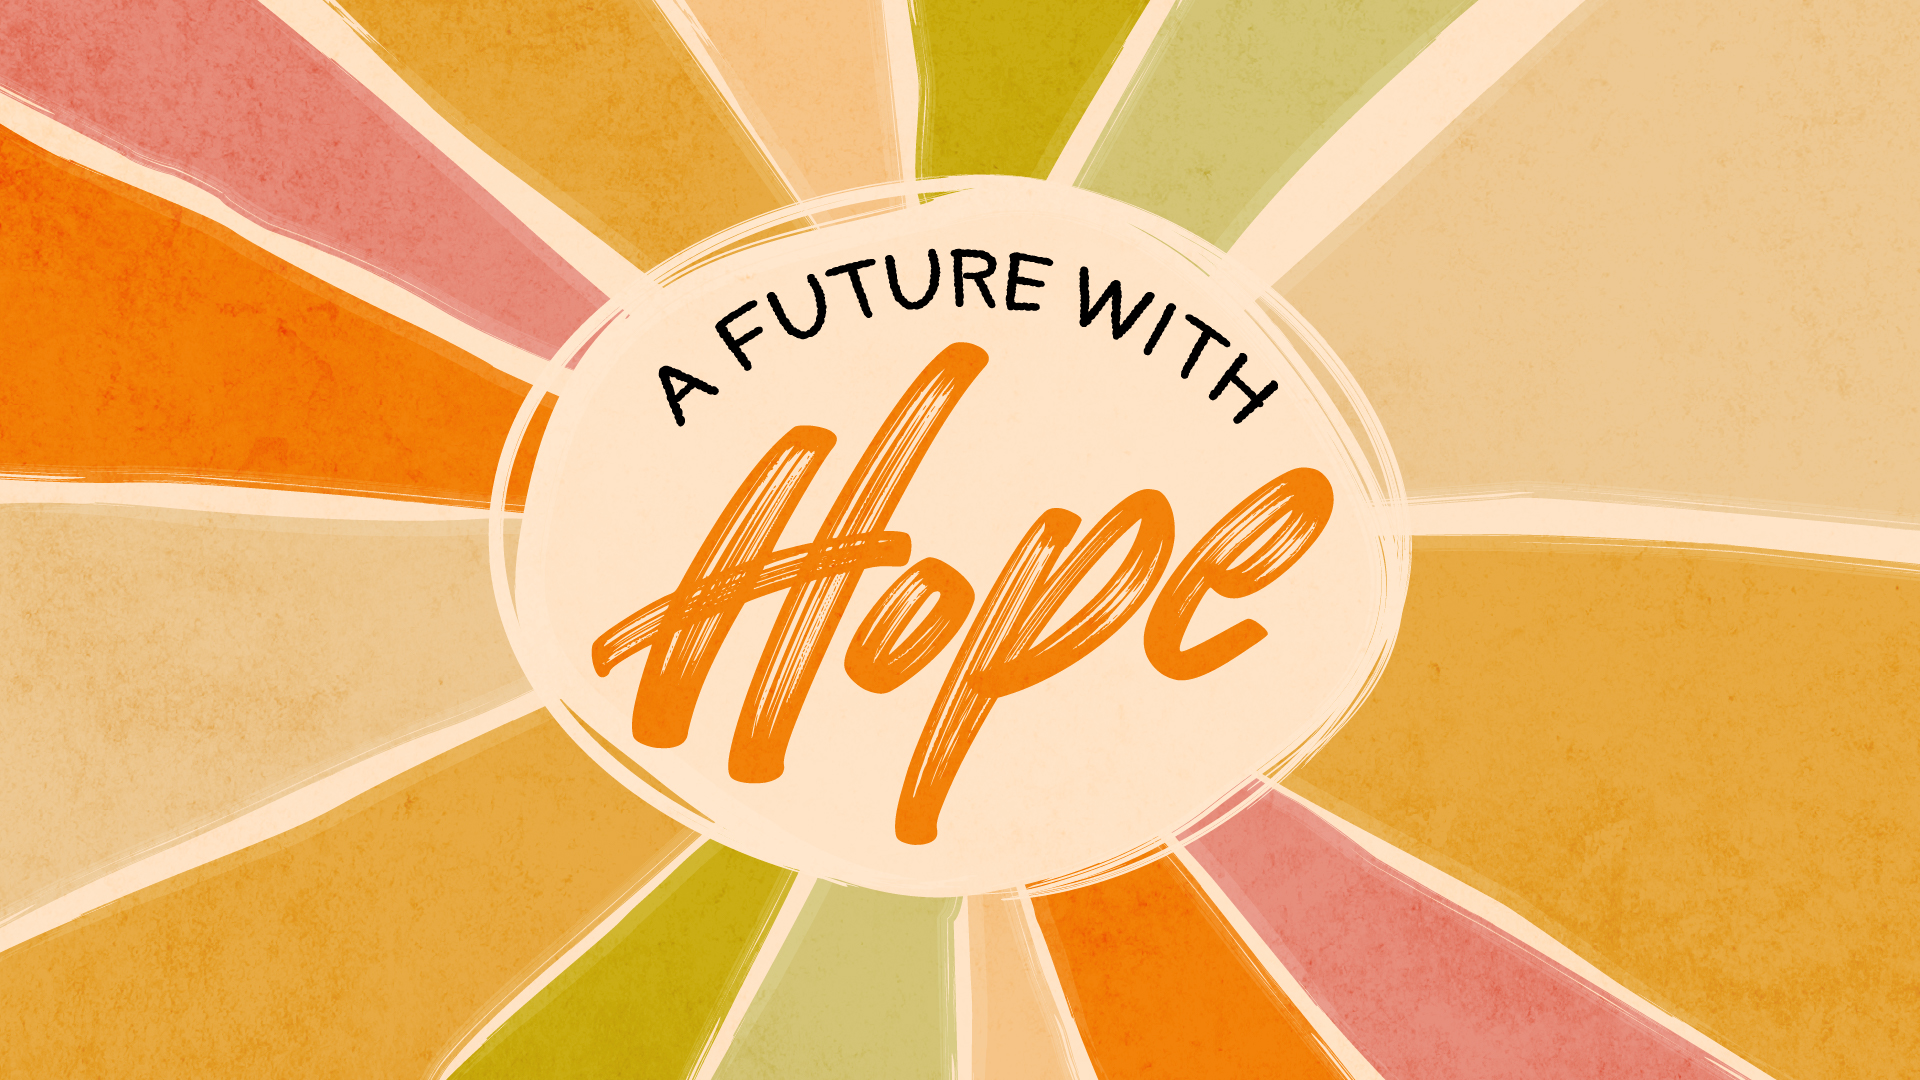 Sunday Worship: Cultivating A Future With Hope